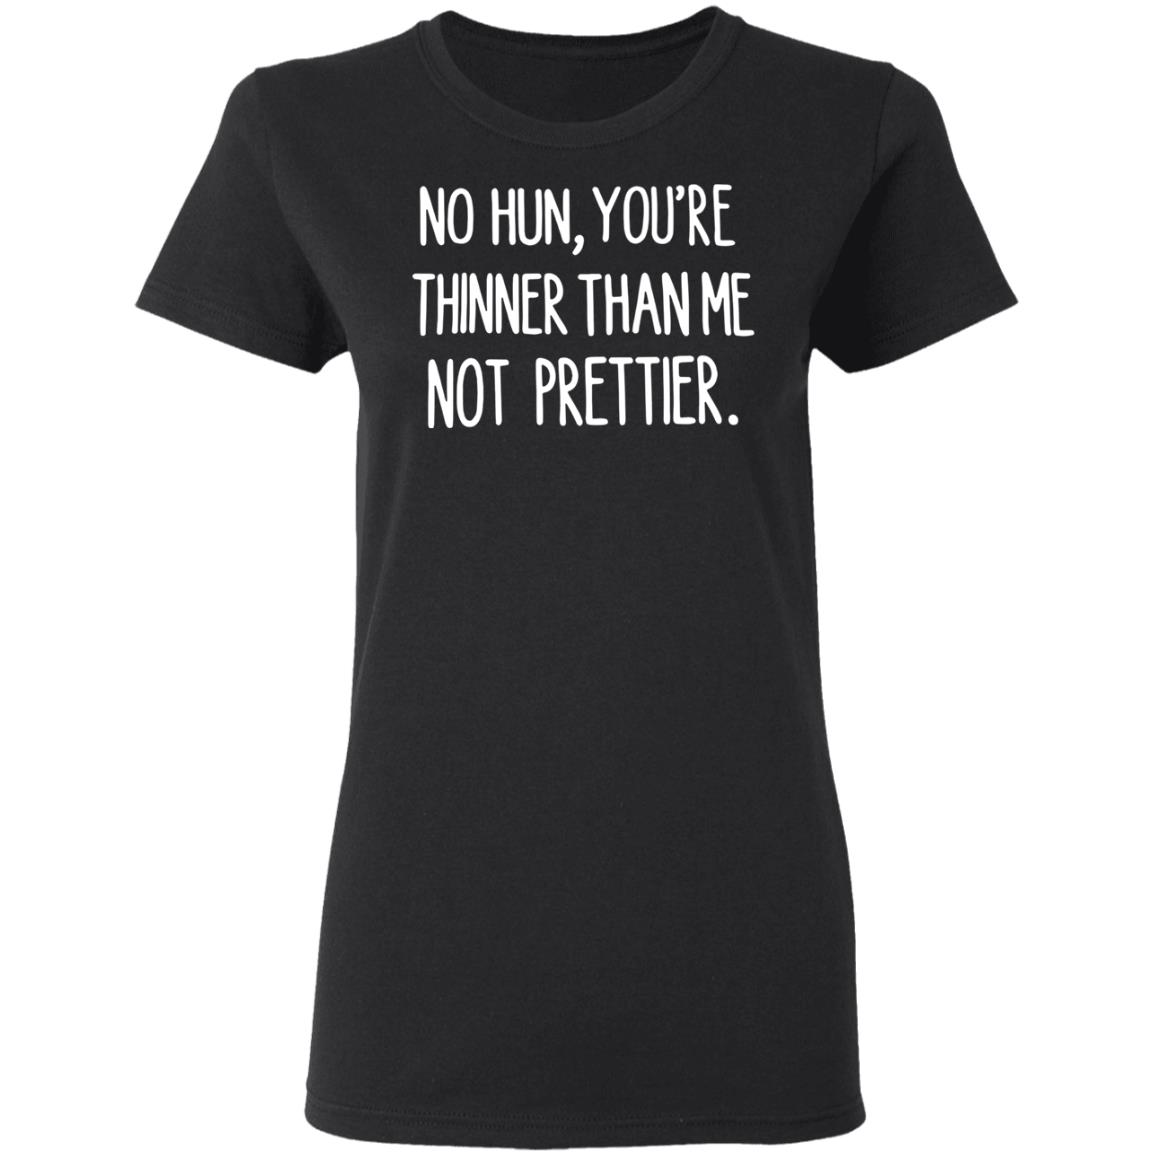 No hun you are thinner than me not prettier shirt